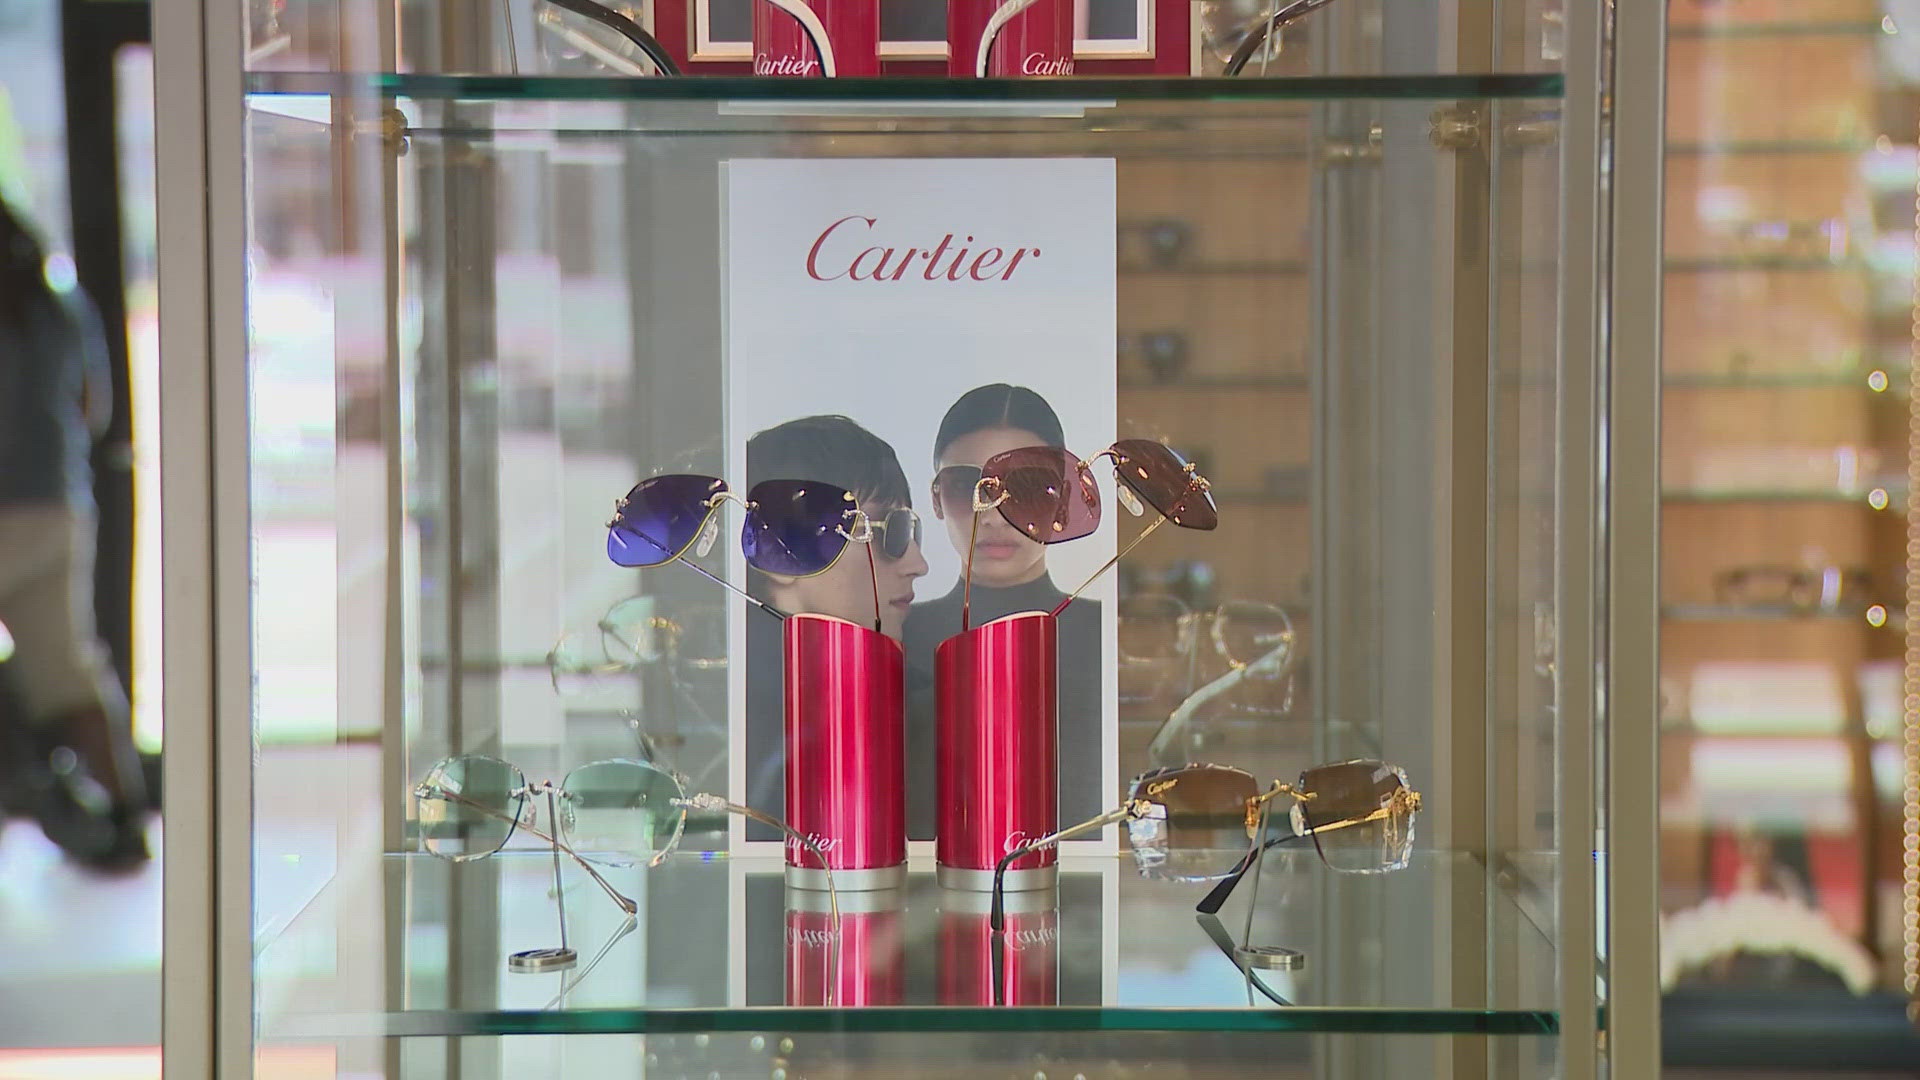 High-end eyewear was stolen from Nicholas Protz's store for the fourth time in the last two months.